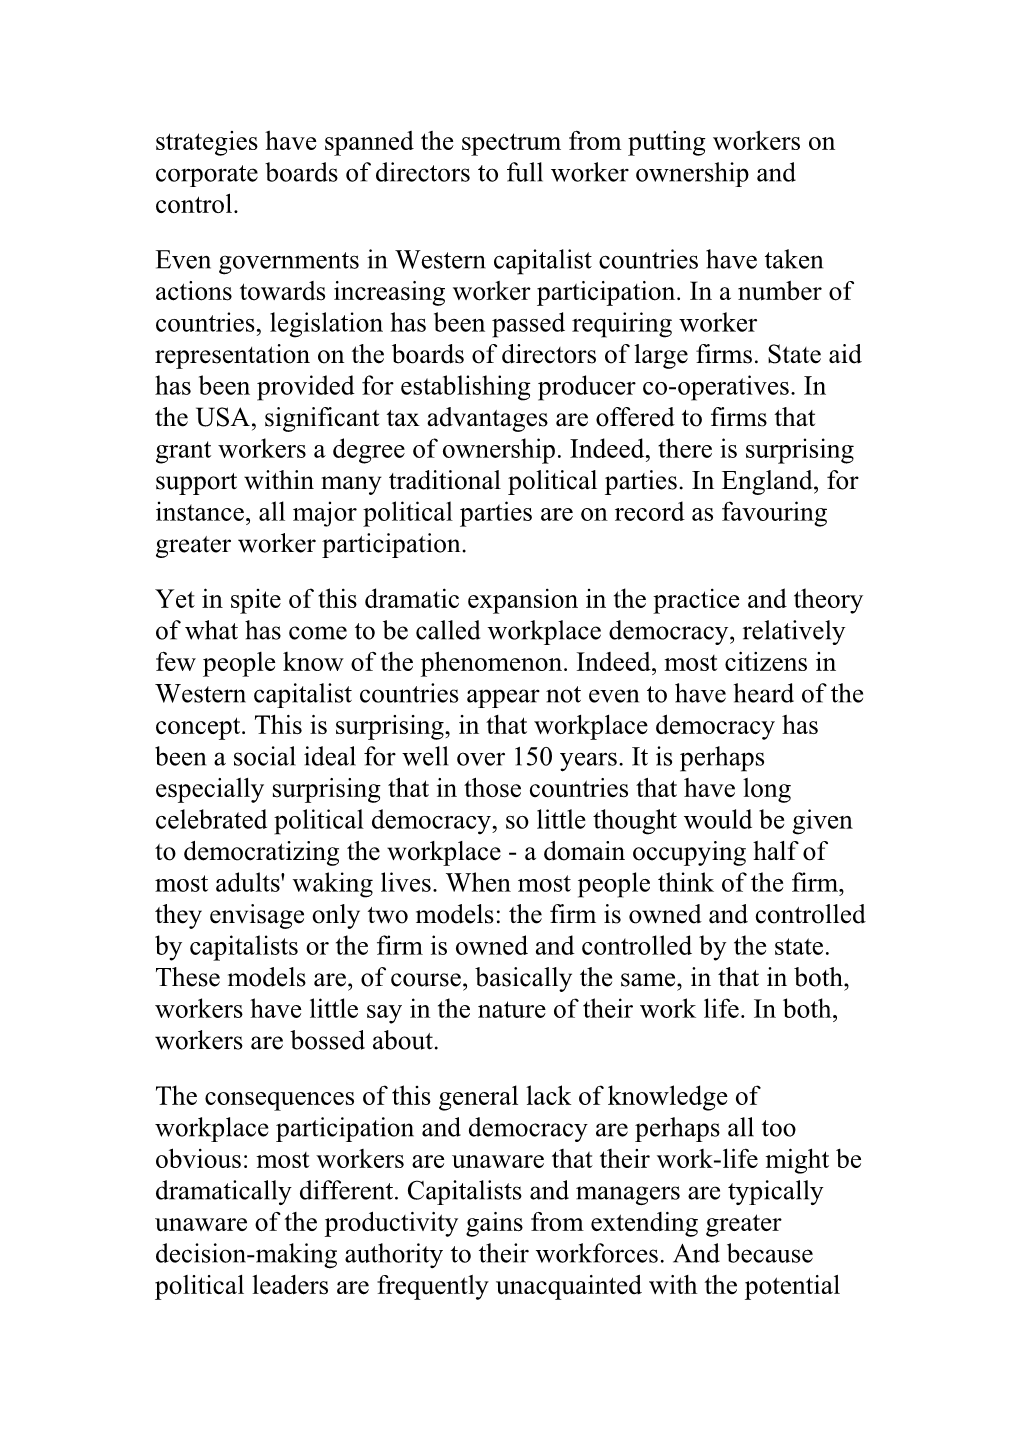 Wiseman - the Ignored Question of Workplace Democracy in Political Discourse - 1997